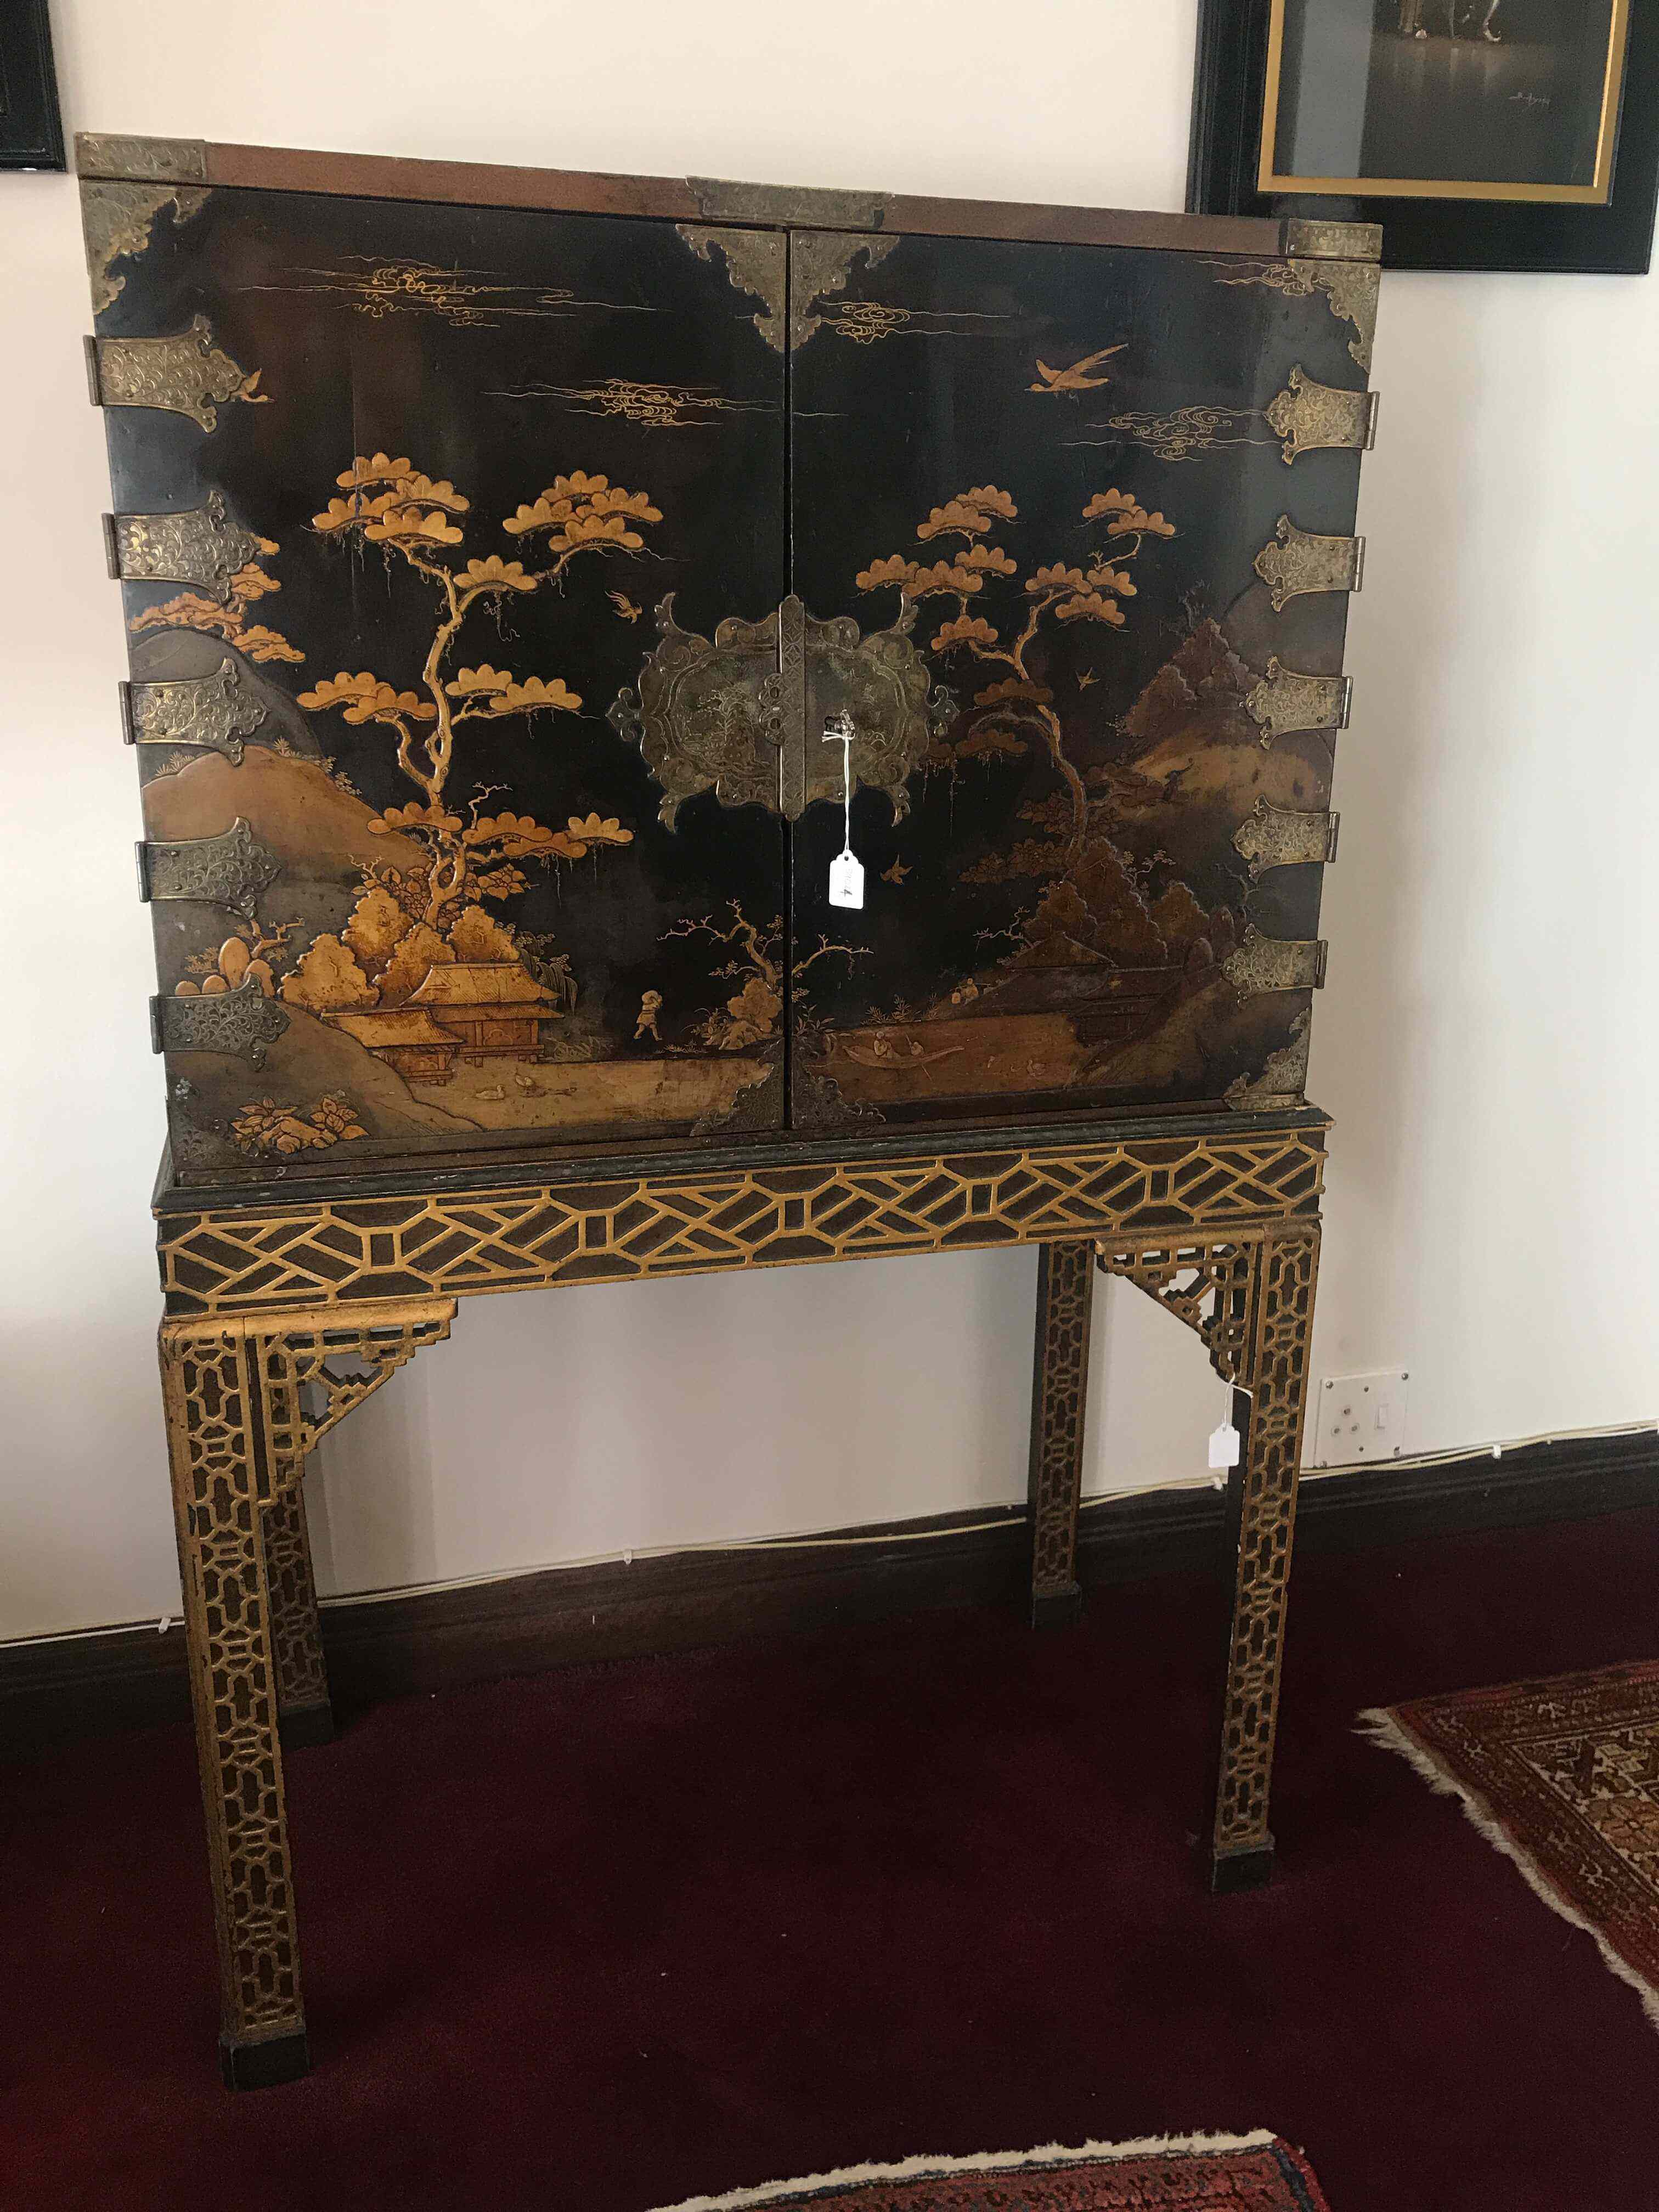 A black lacquered and gilt-metal-mounted cabinet-on-stand, 18th/19th century